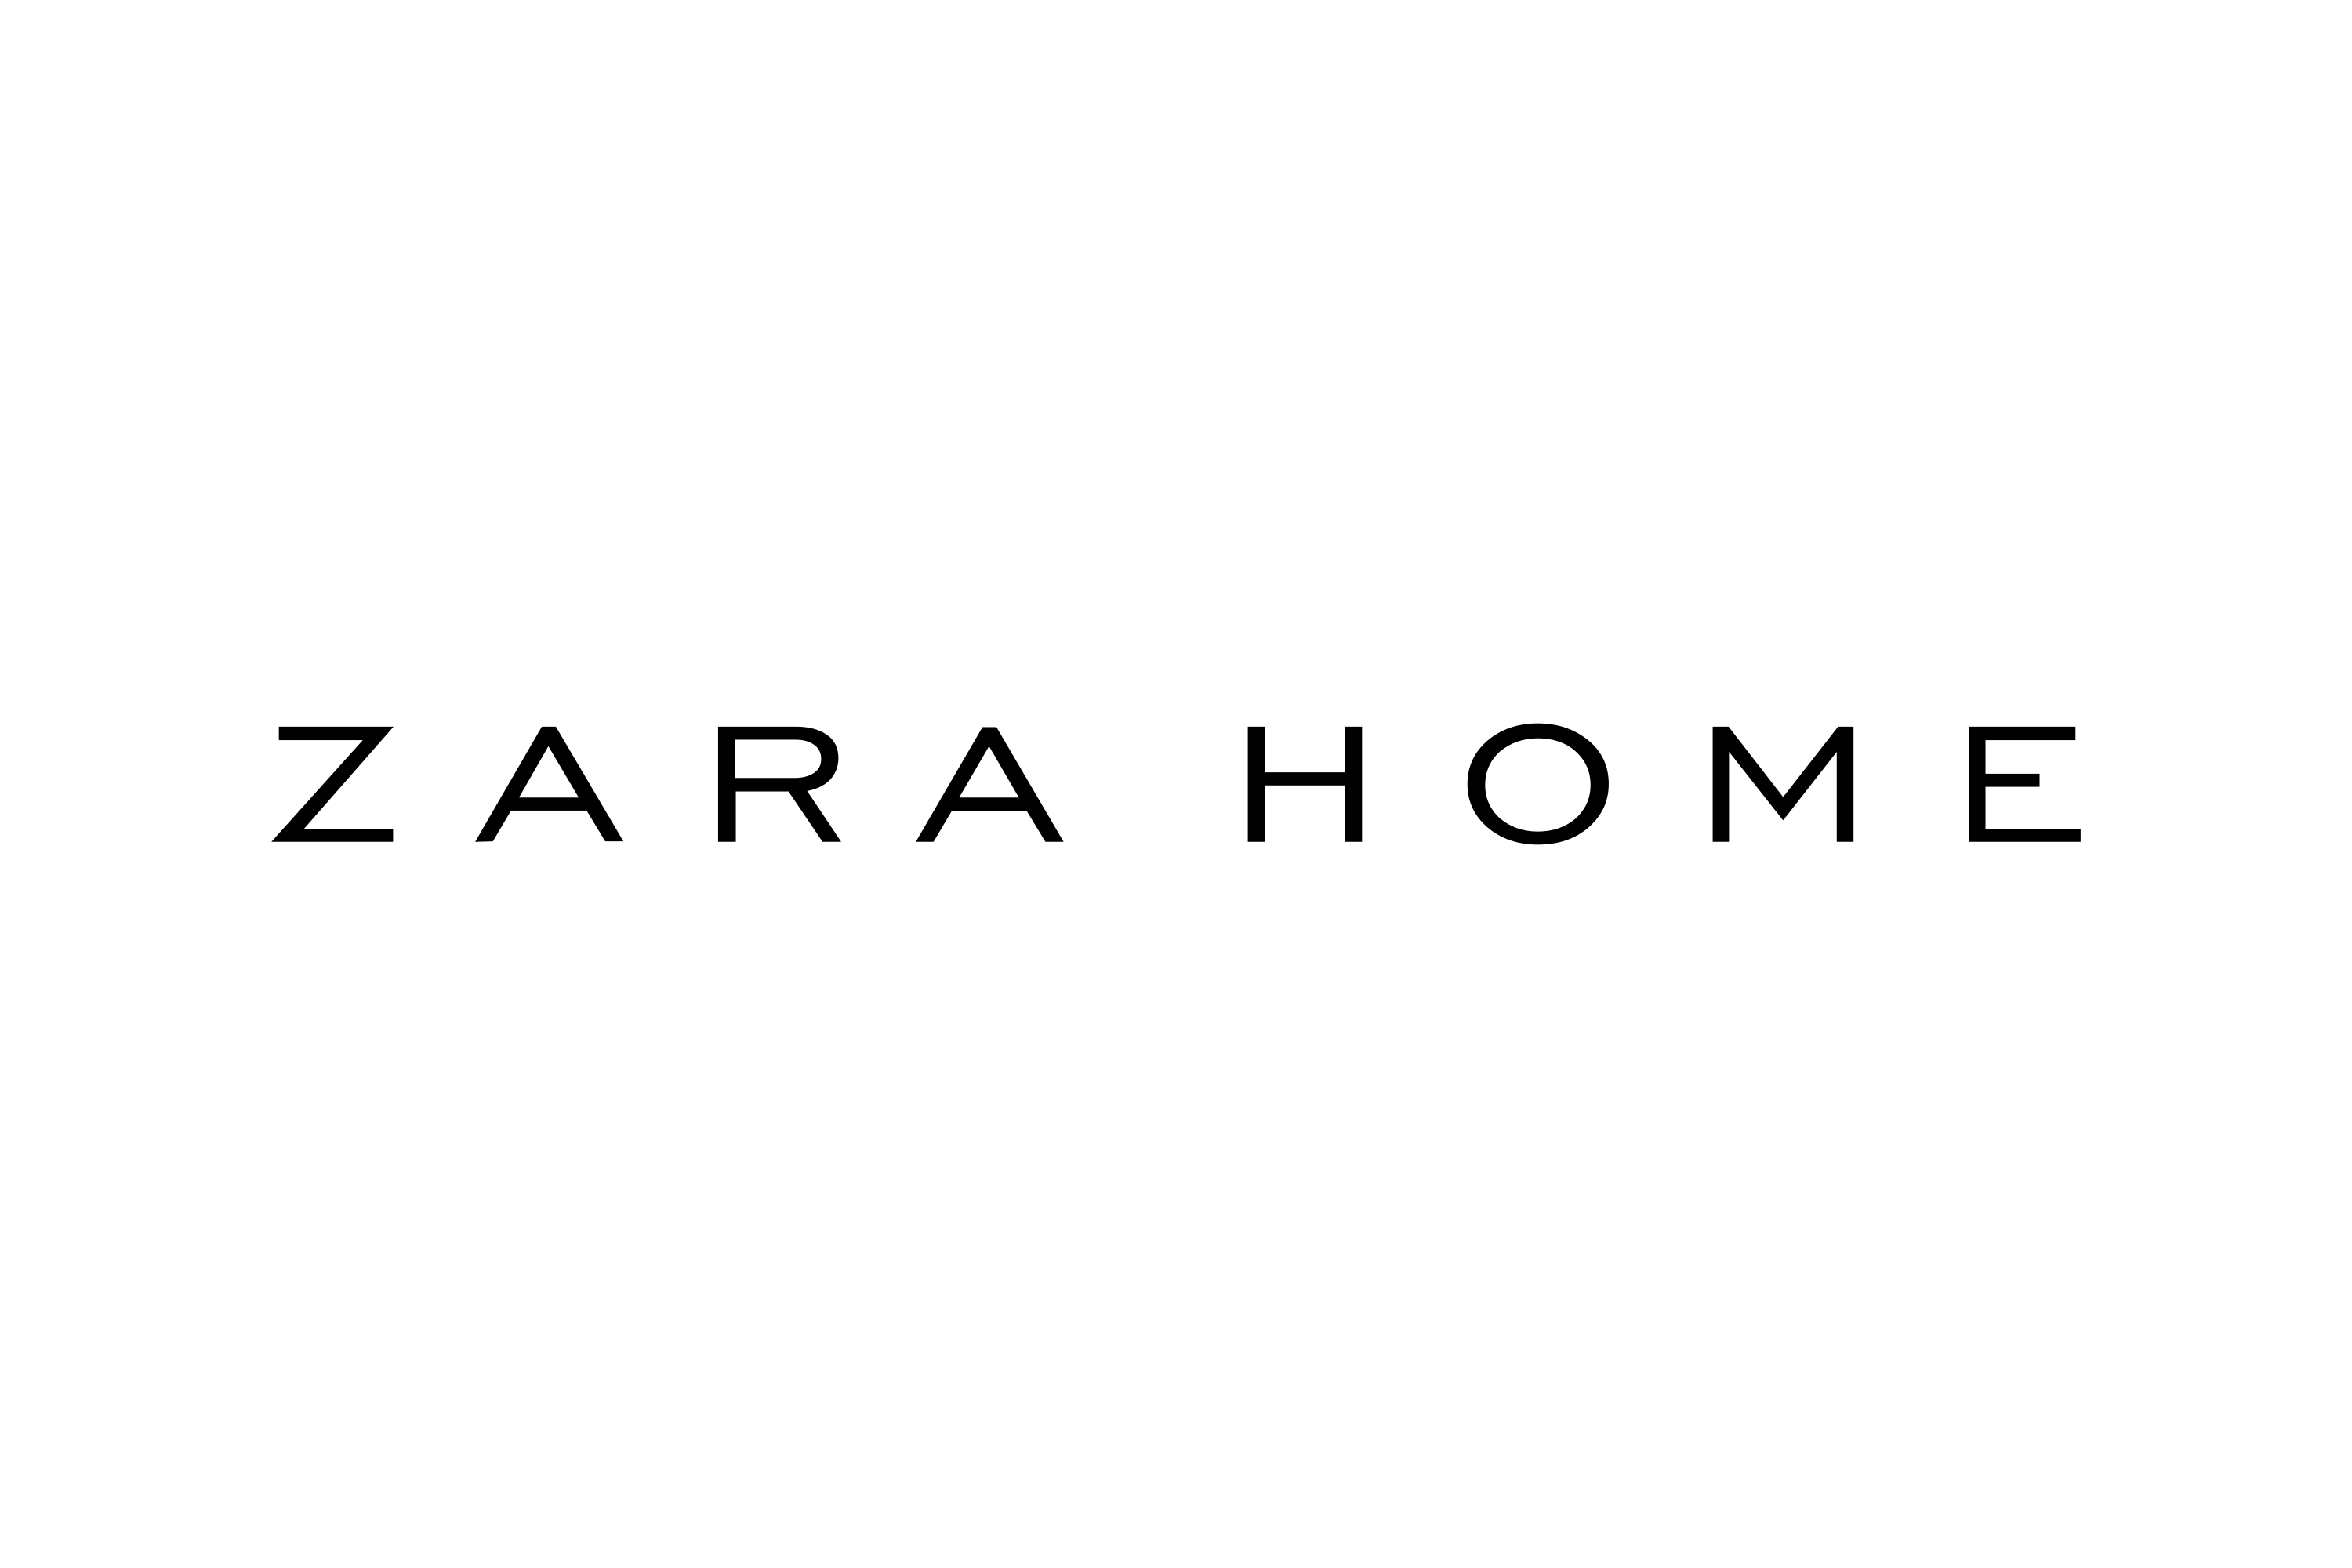 Home Logo Png Download - 520*